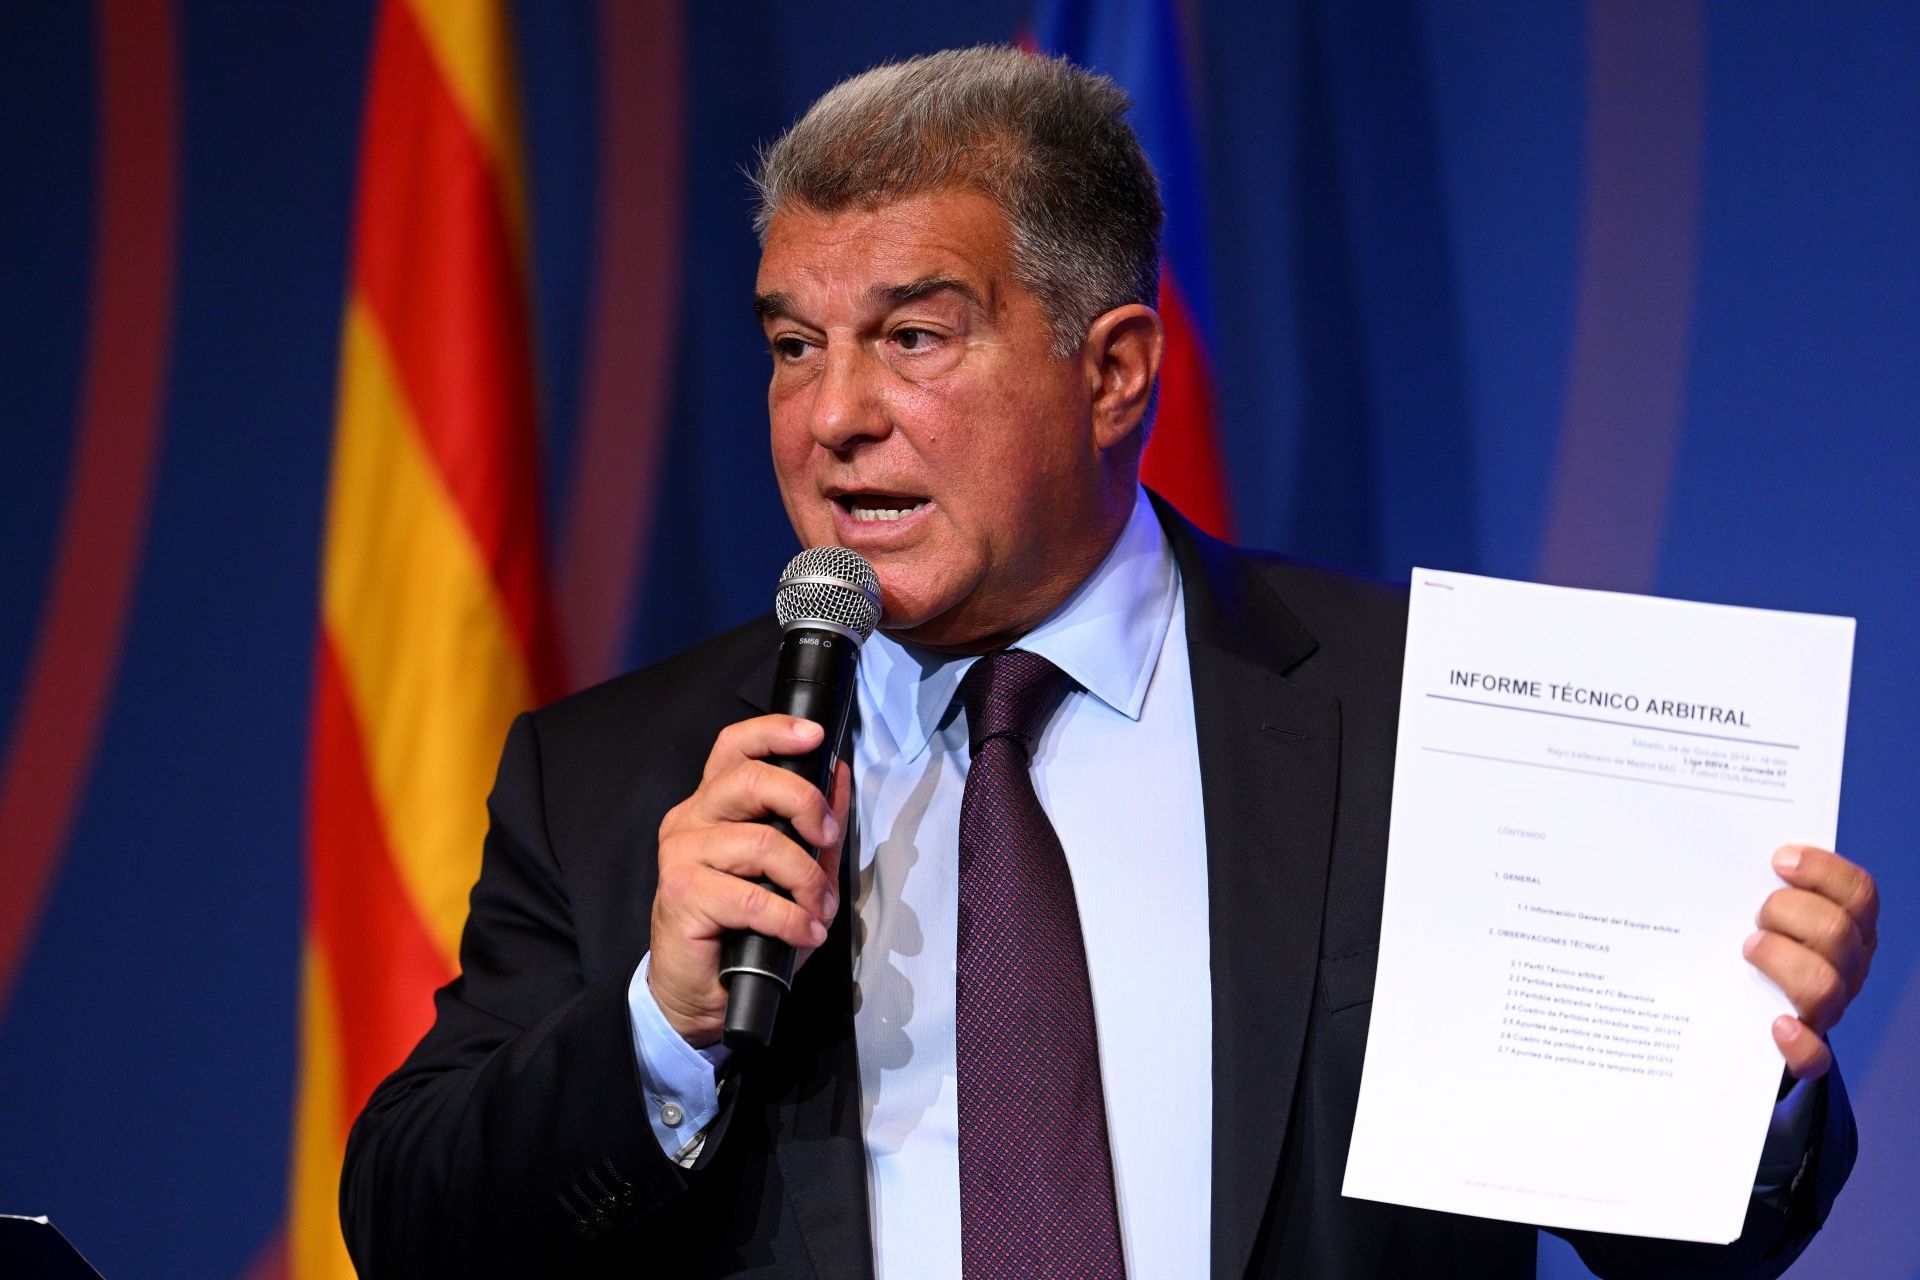 FC Barcelona President Joan Laporta may have saved the club&#039;s present by gambing on its future.